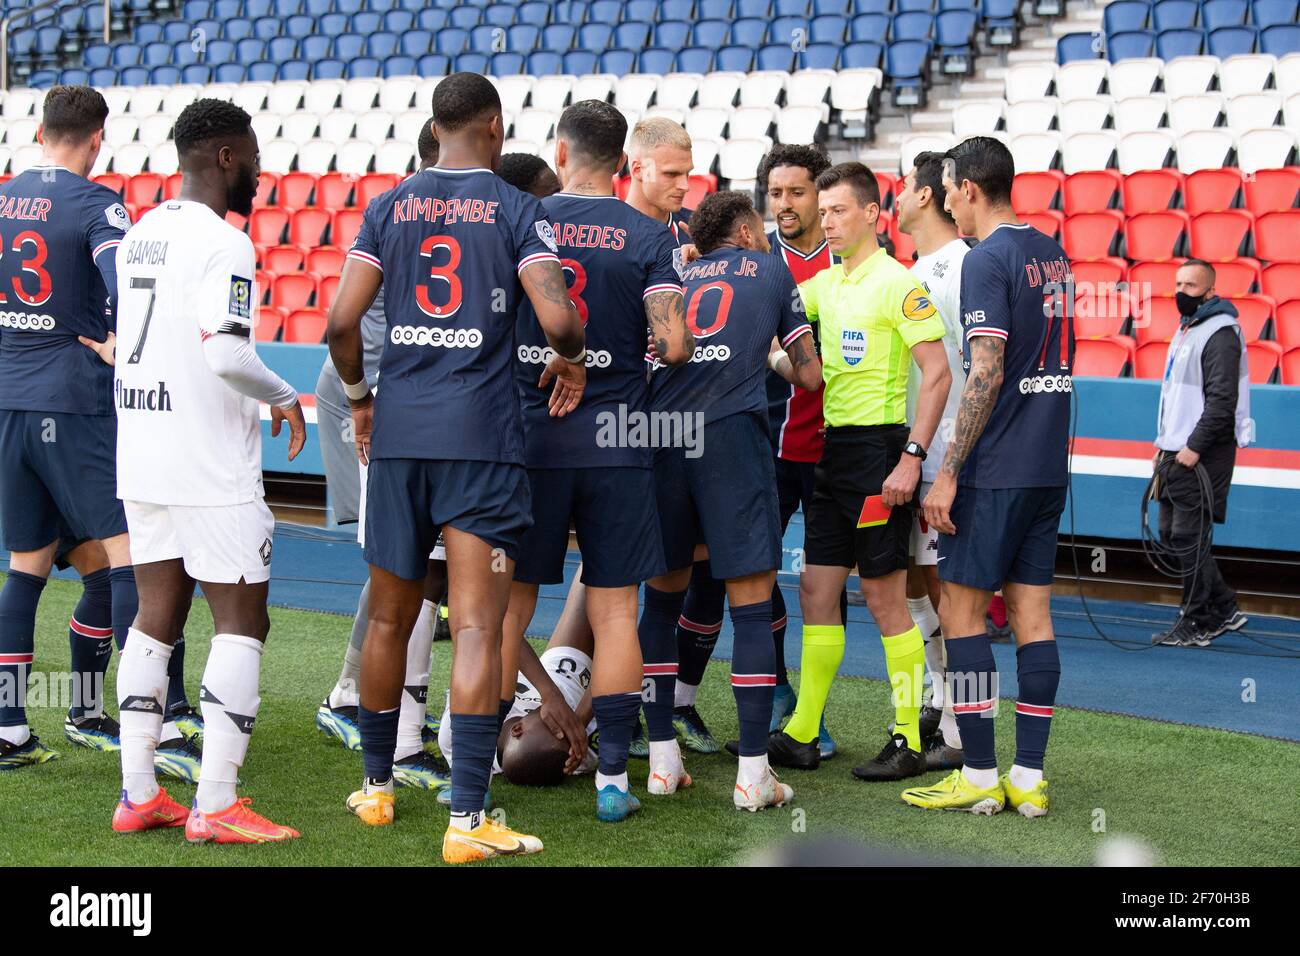 Paris Saint-Germain's Neymar Jr gets a red card from referee Benoit Bastien  after fouling Lille OSC's Tiago Djalo during the Ligue 1 match between  Paris Saint Germain and LOSC Lille at Parc